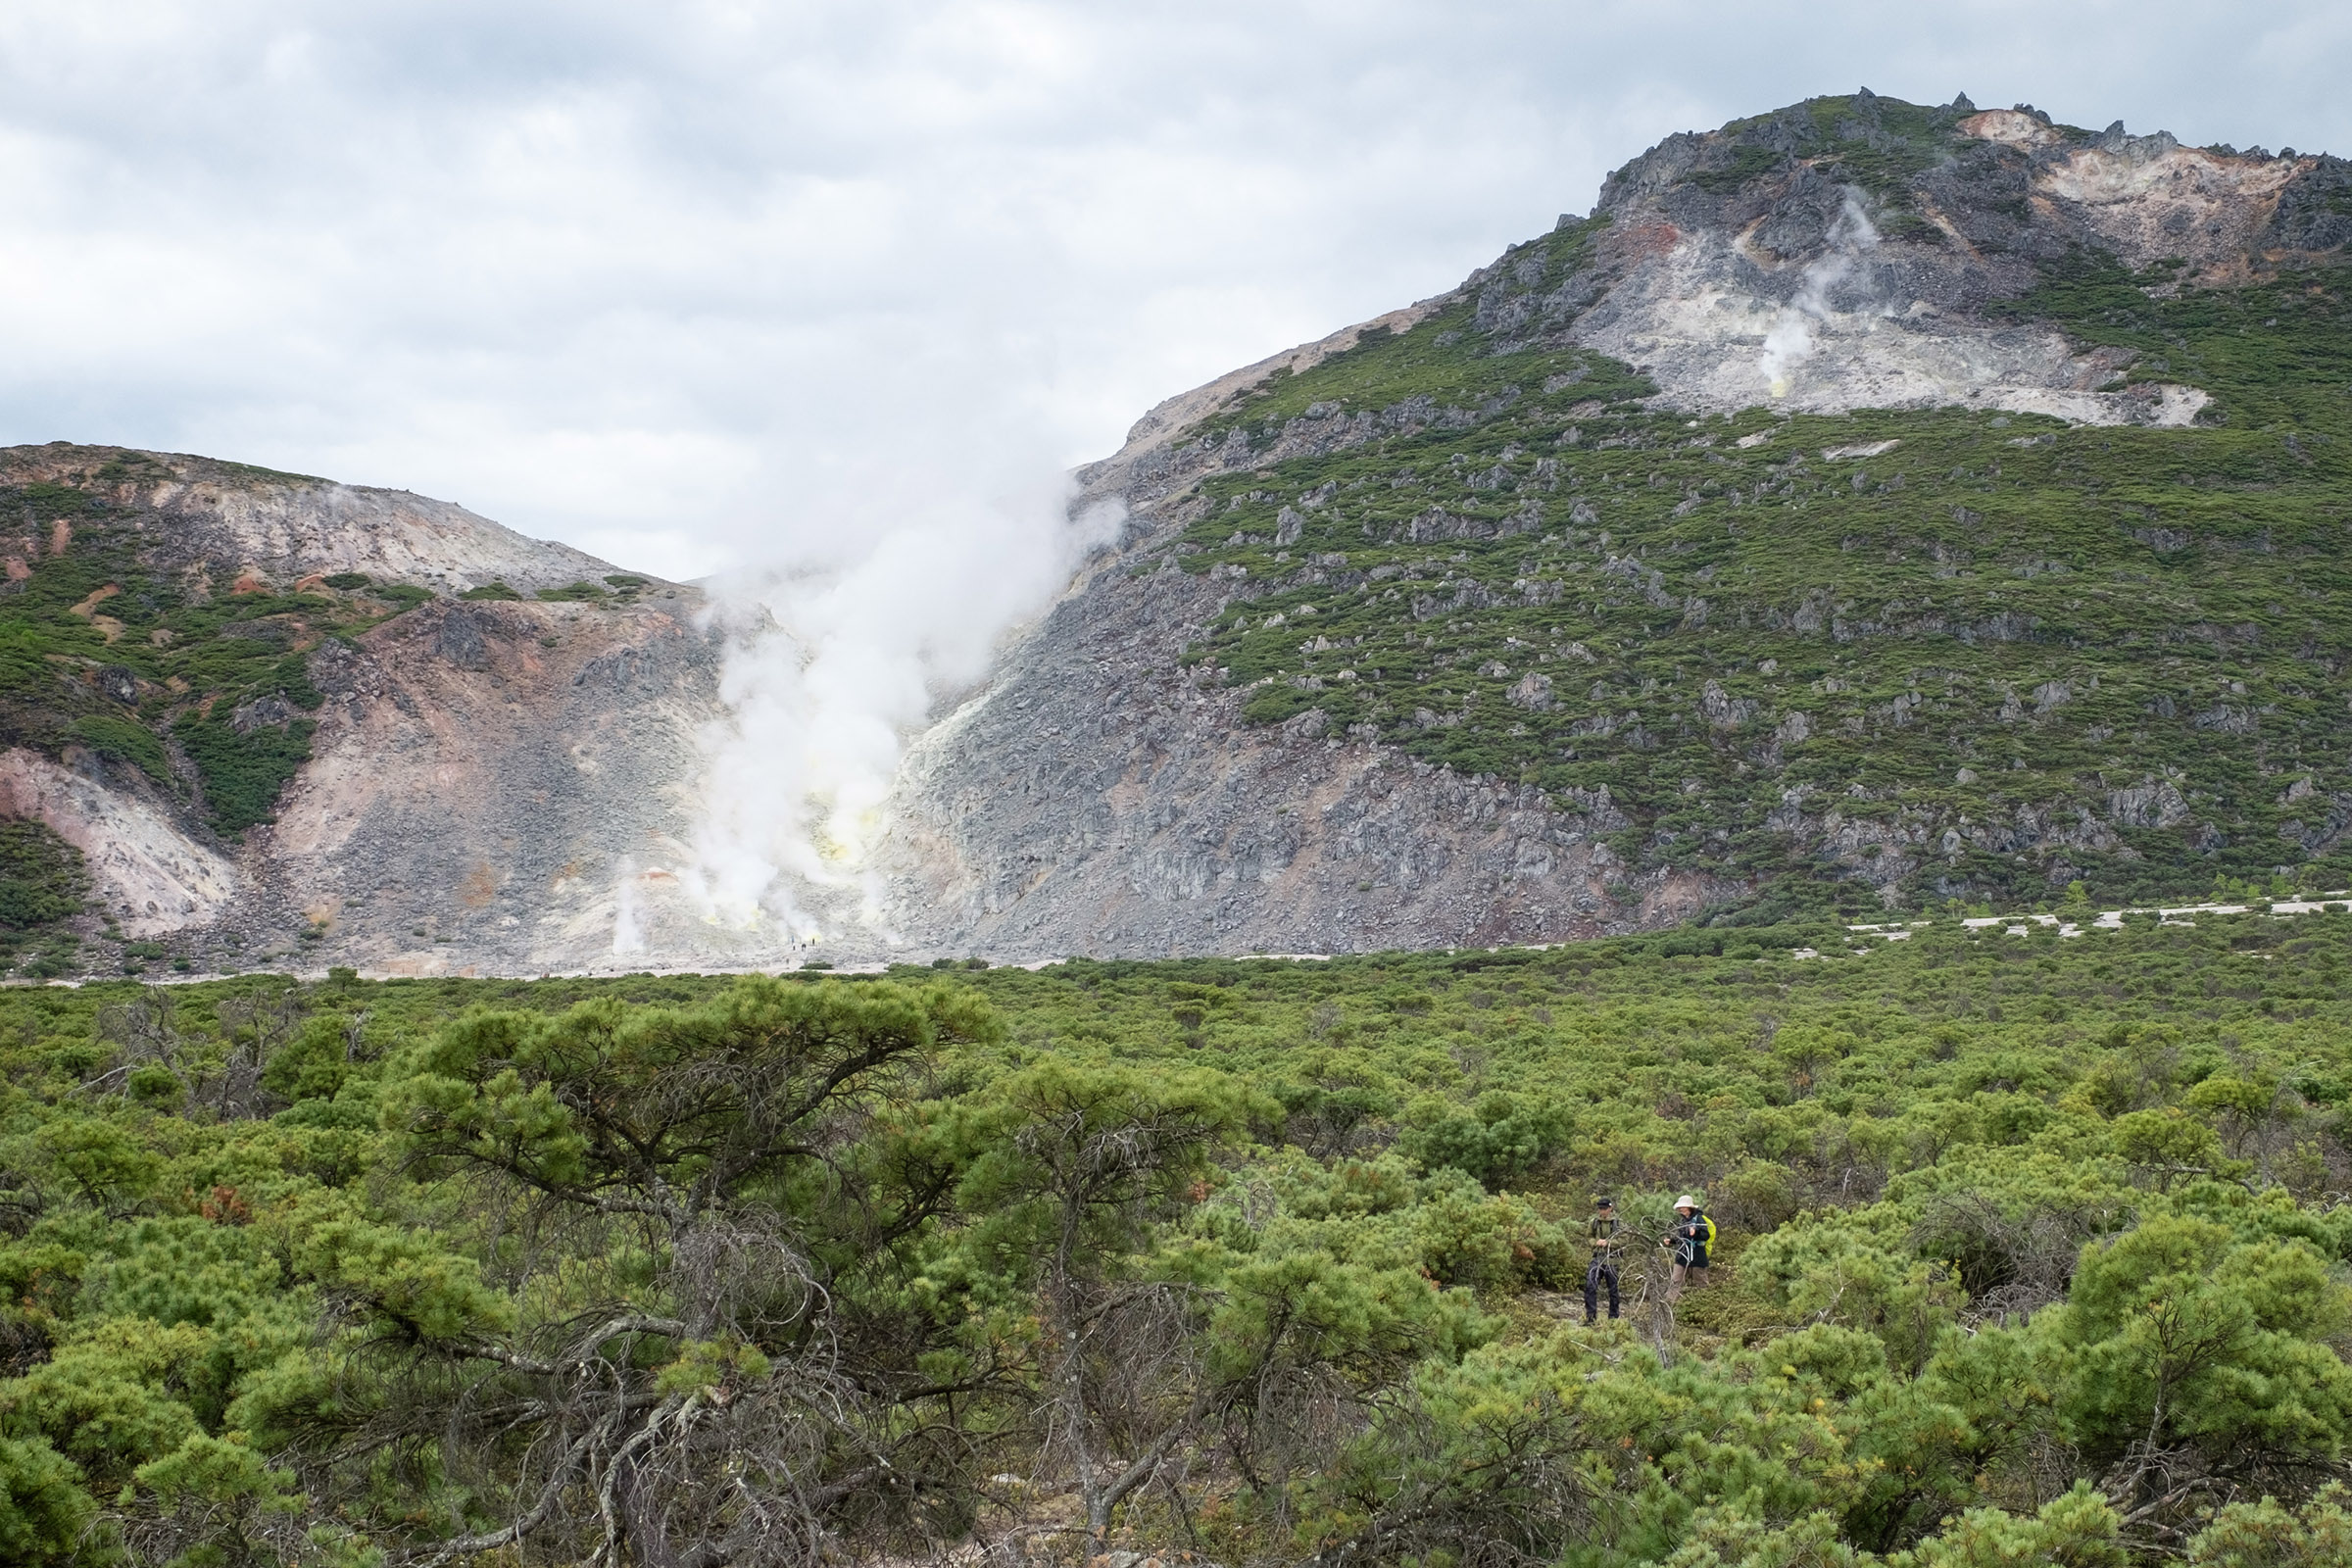 Steam rises from sulphurous vents on Mt Io in the Akan–Mashu national park. The vents are seen in the distance above a sea of green pine trees. Two hikers make their way though the greenary.